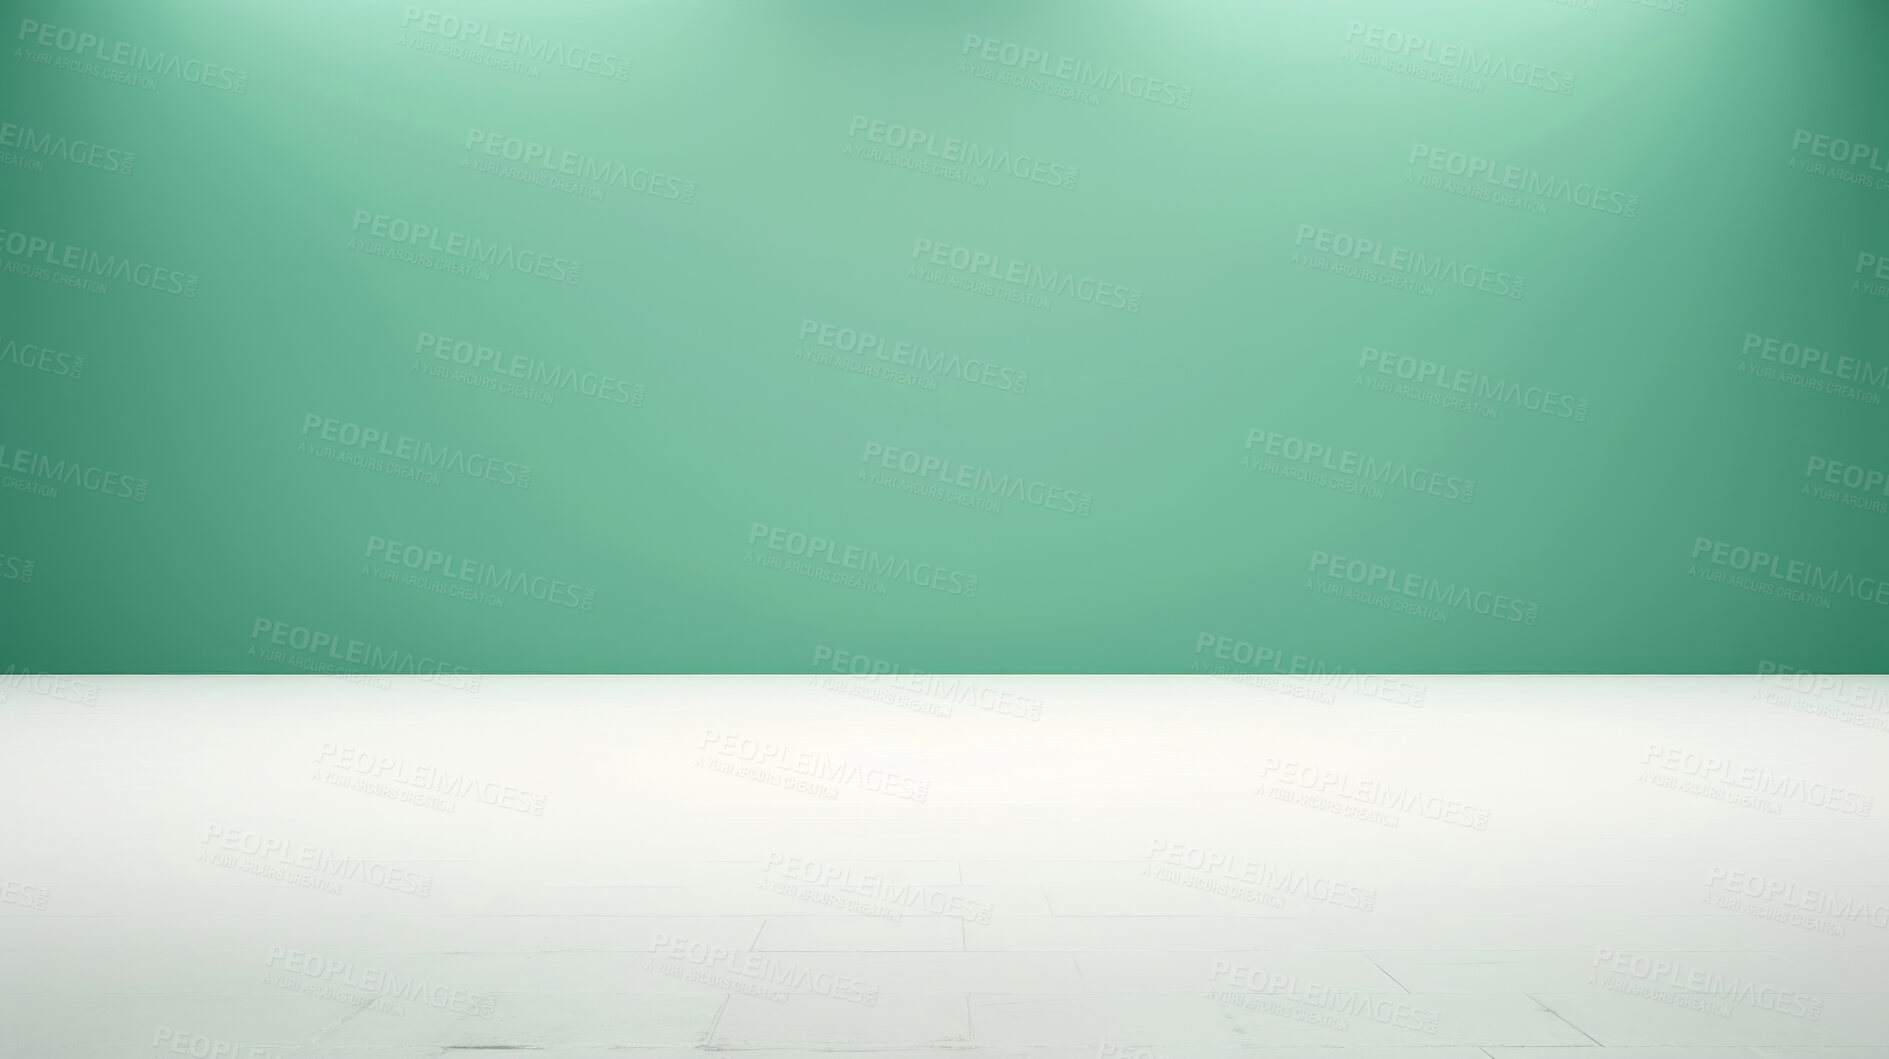 Buy stock photo Minimal abstract empty interior background. Colourful walls, wooden floor.